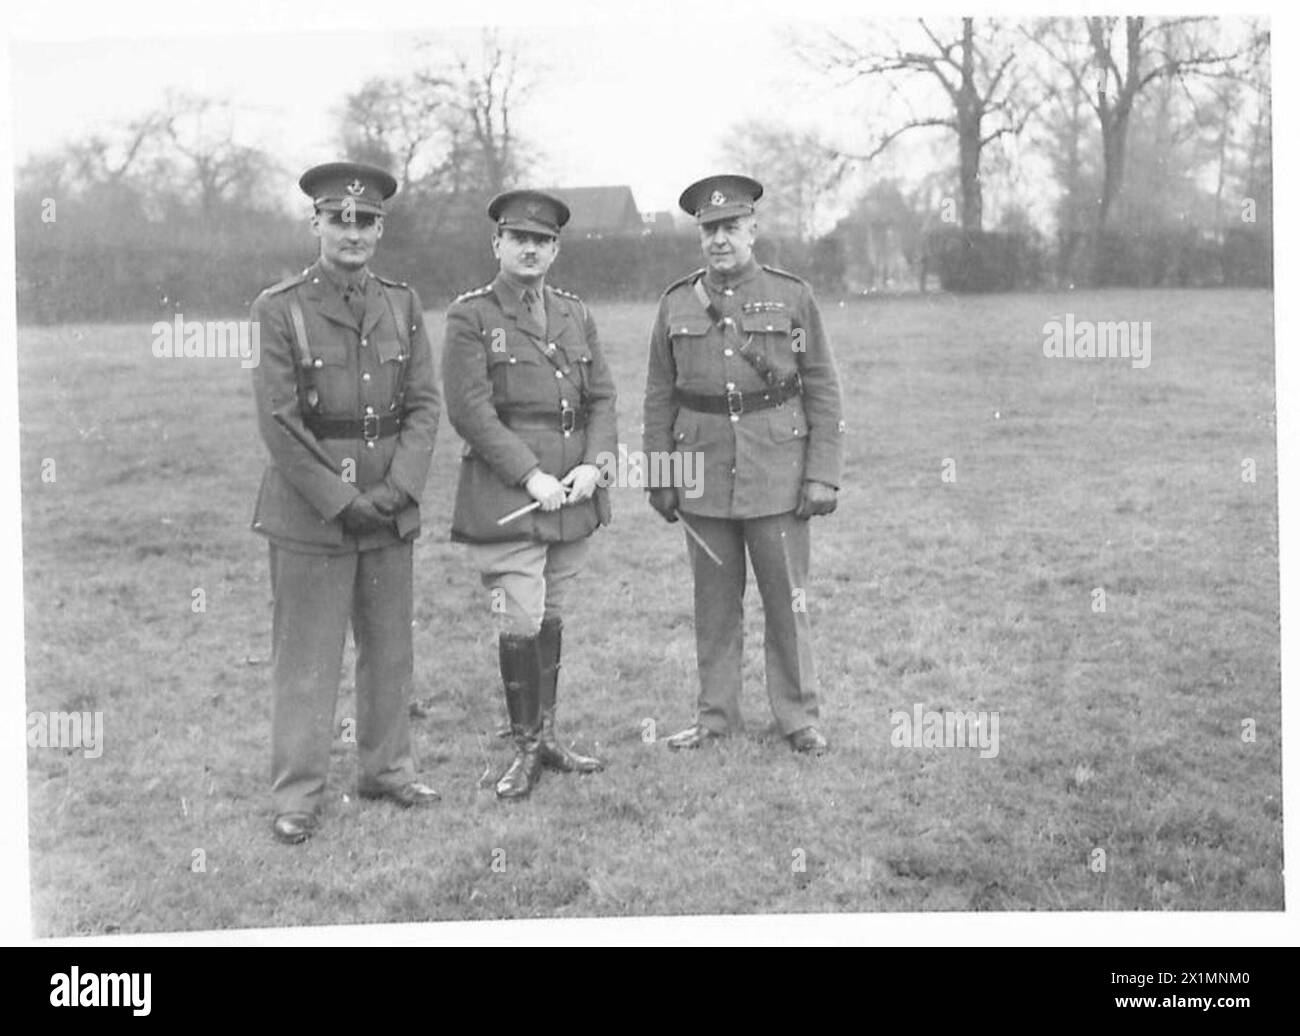 A MILITARY POLICE UNIT - Left to right - Lieut. J.P.R. Hoole; Captain R.D. Hammond and RSM H.F. Andrews, MM, British Army Stock Photo